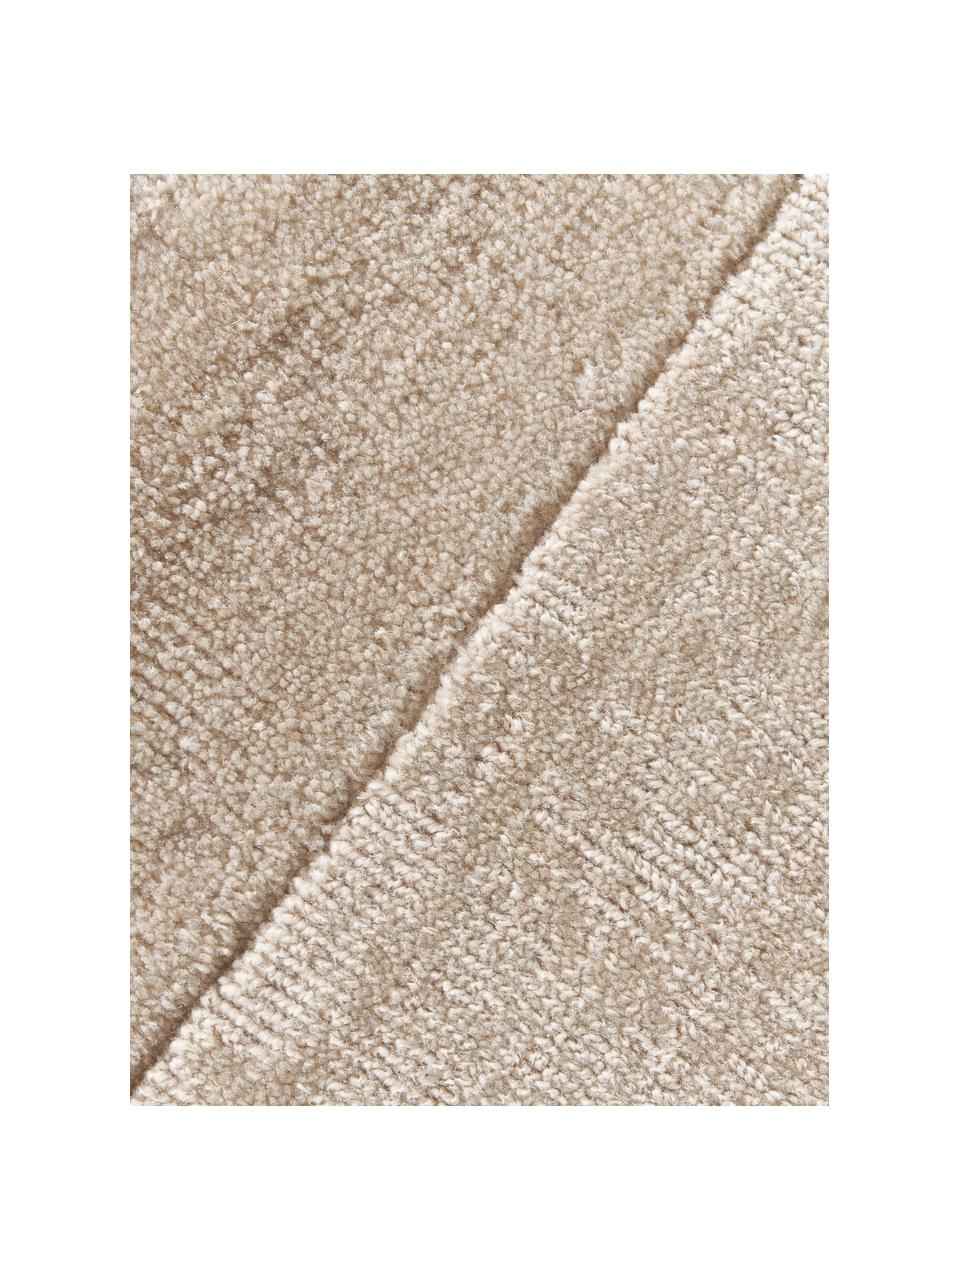 Tappeto luccicante Kari, 100% poliestere certificato GRS (Global Recycle Standard), Beige, Larg. 80 x Lung. 150 cm (taglia XS)